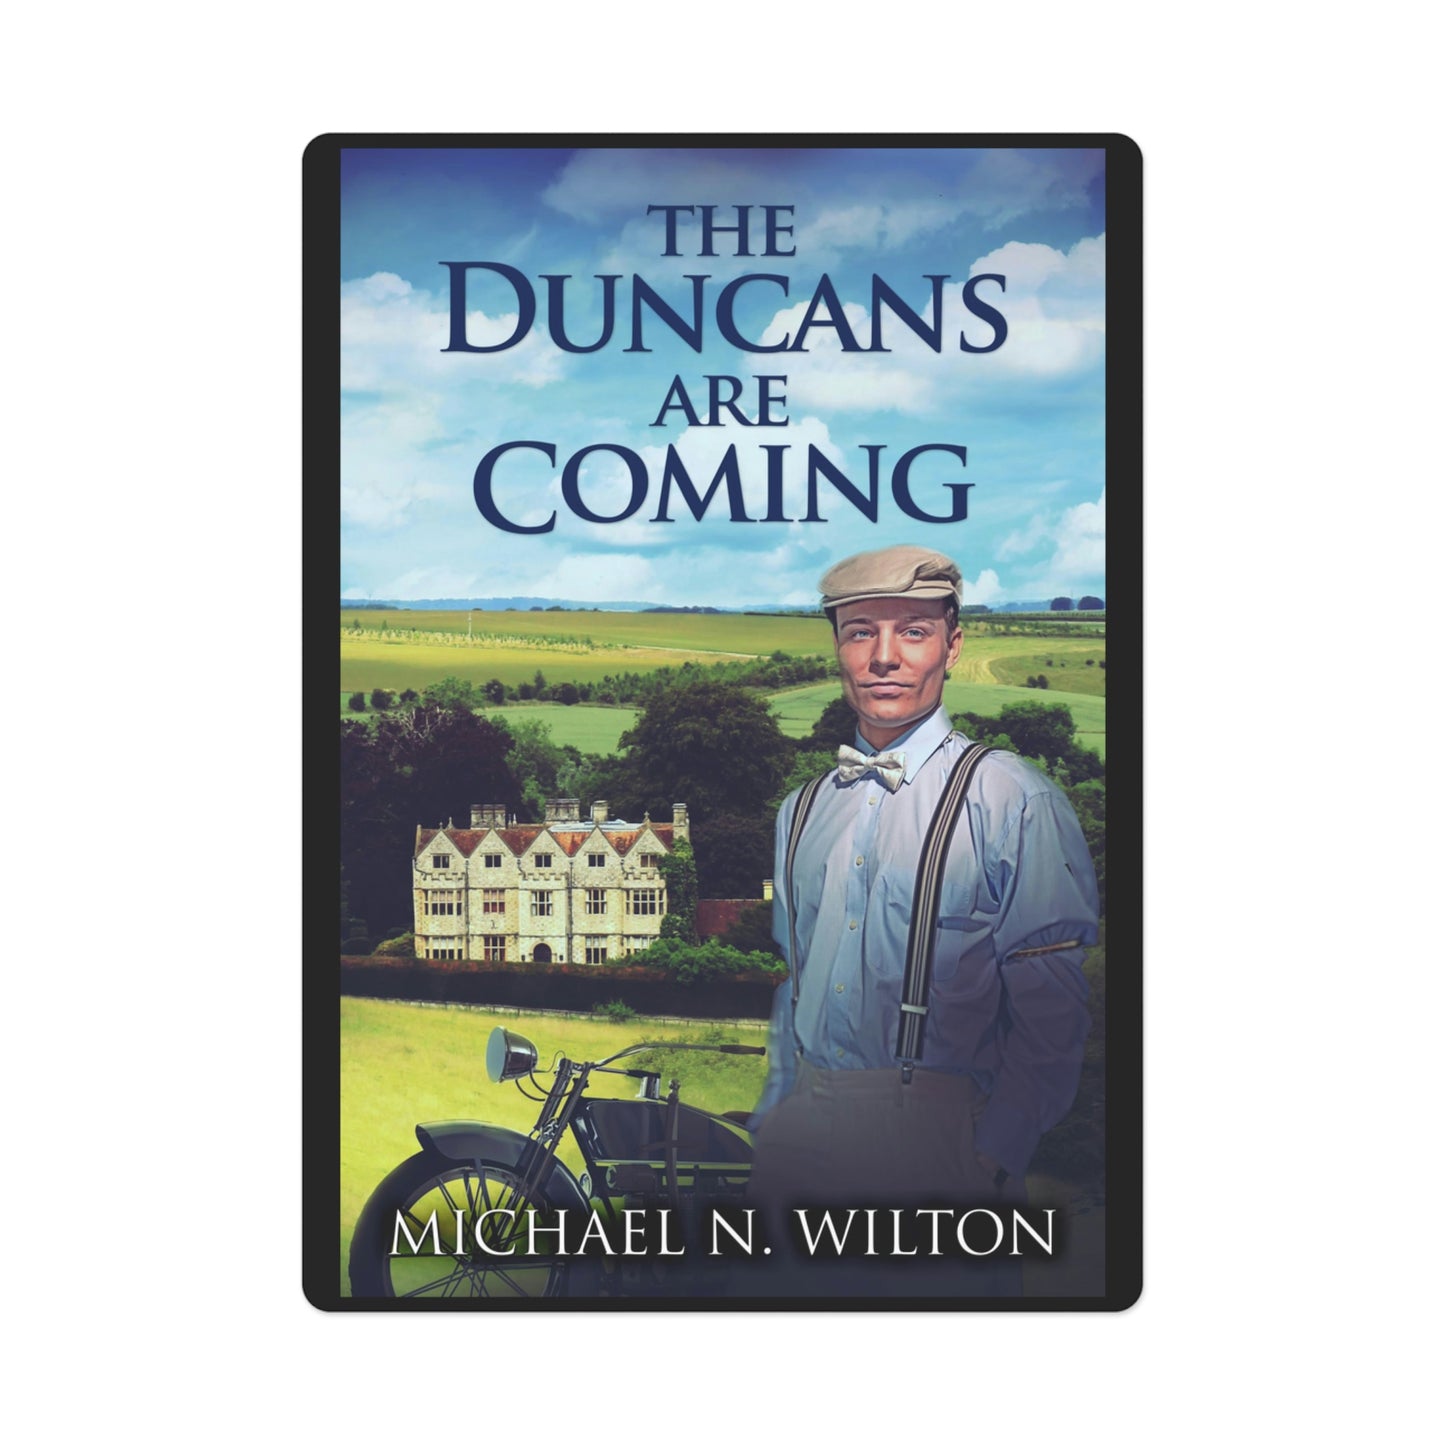 The Duncans Are Coming - Playing Cards